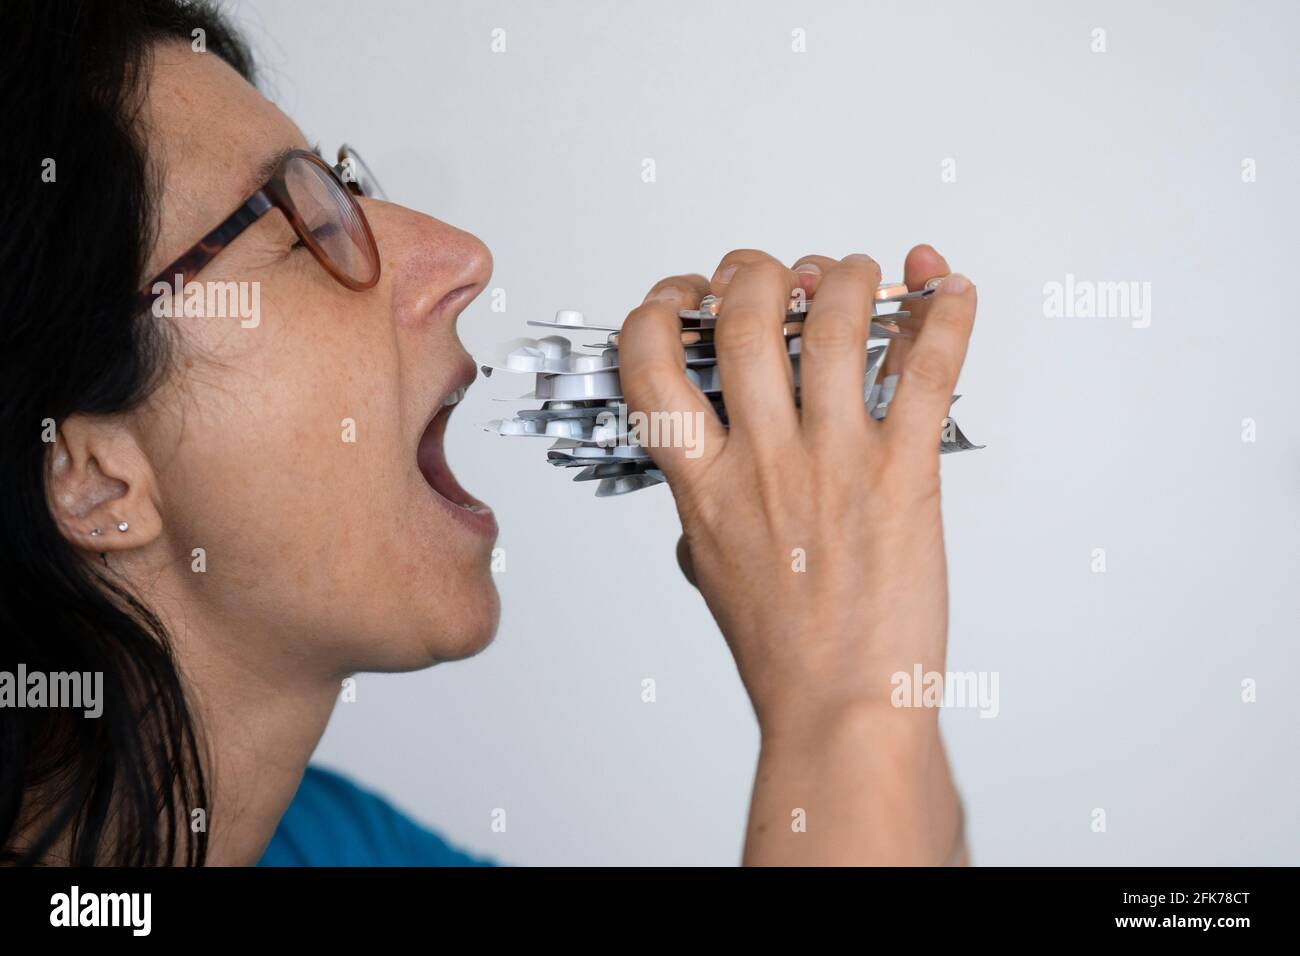 Middle-aged woman eats blister packs of pills like a sandwich. Drug addiction and abuse concept. Stock Photo